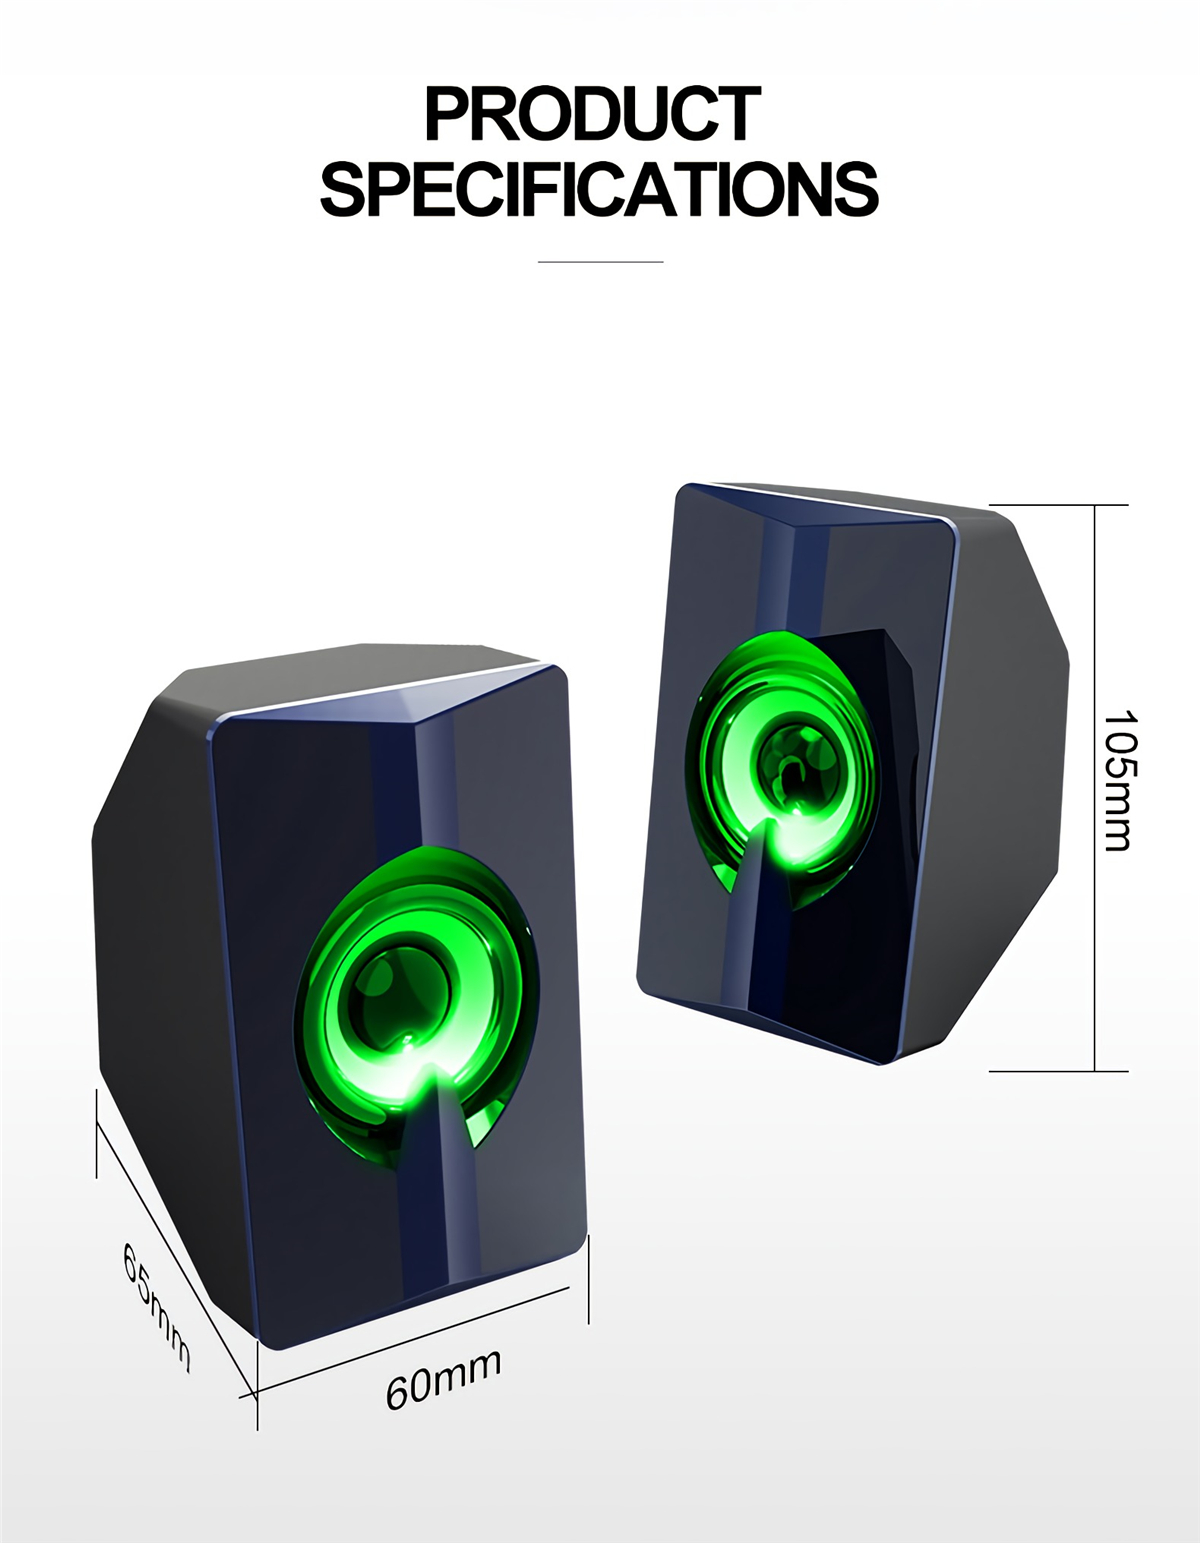 T-WOLF-S5-Colorful-Luminous-Speaker-4D-Surround-Sound-Wired-Computer-Speaker-Gaming-Loudspeaker-for--1850667-10